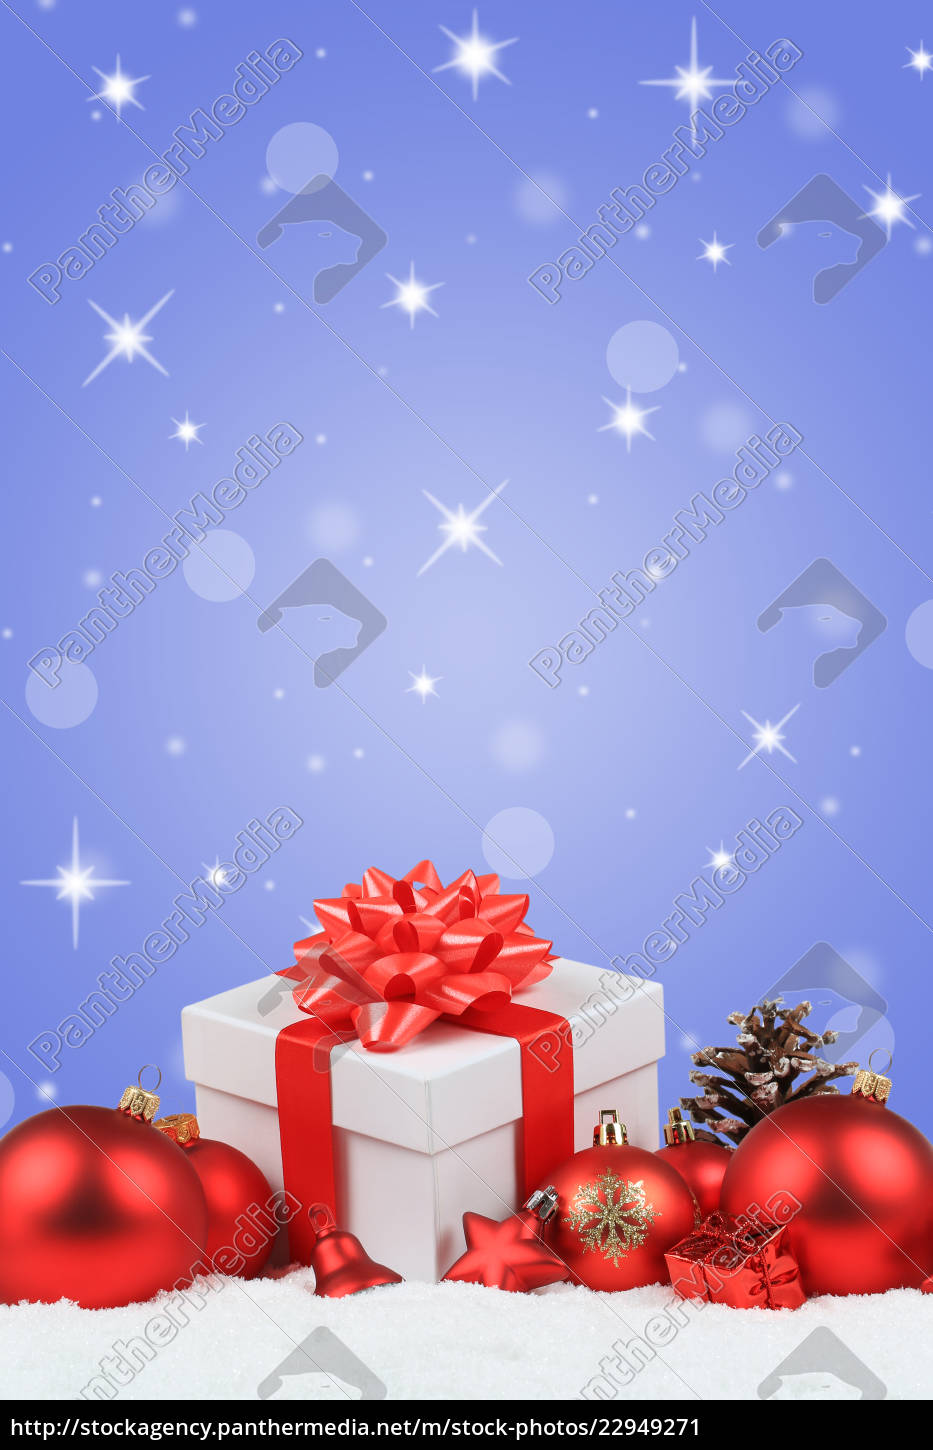 Christmas Gifts Christmas Gifts Upright Winter Snow Royalty Free Image Panthermedia Stock Agency